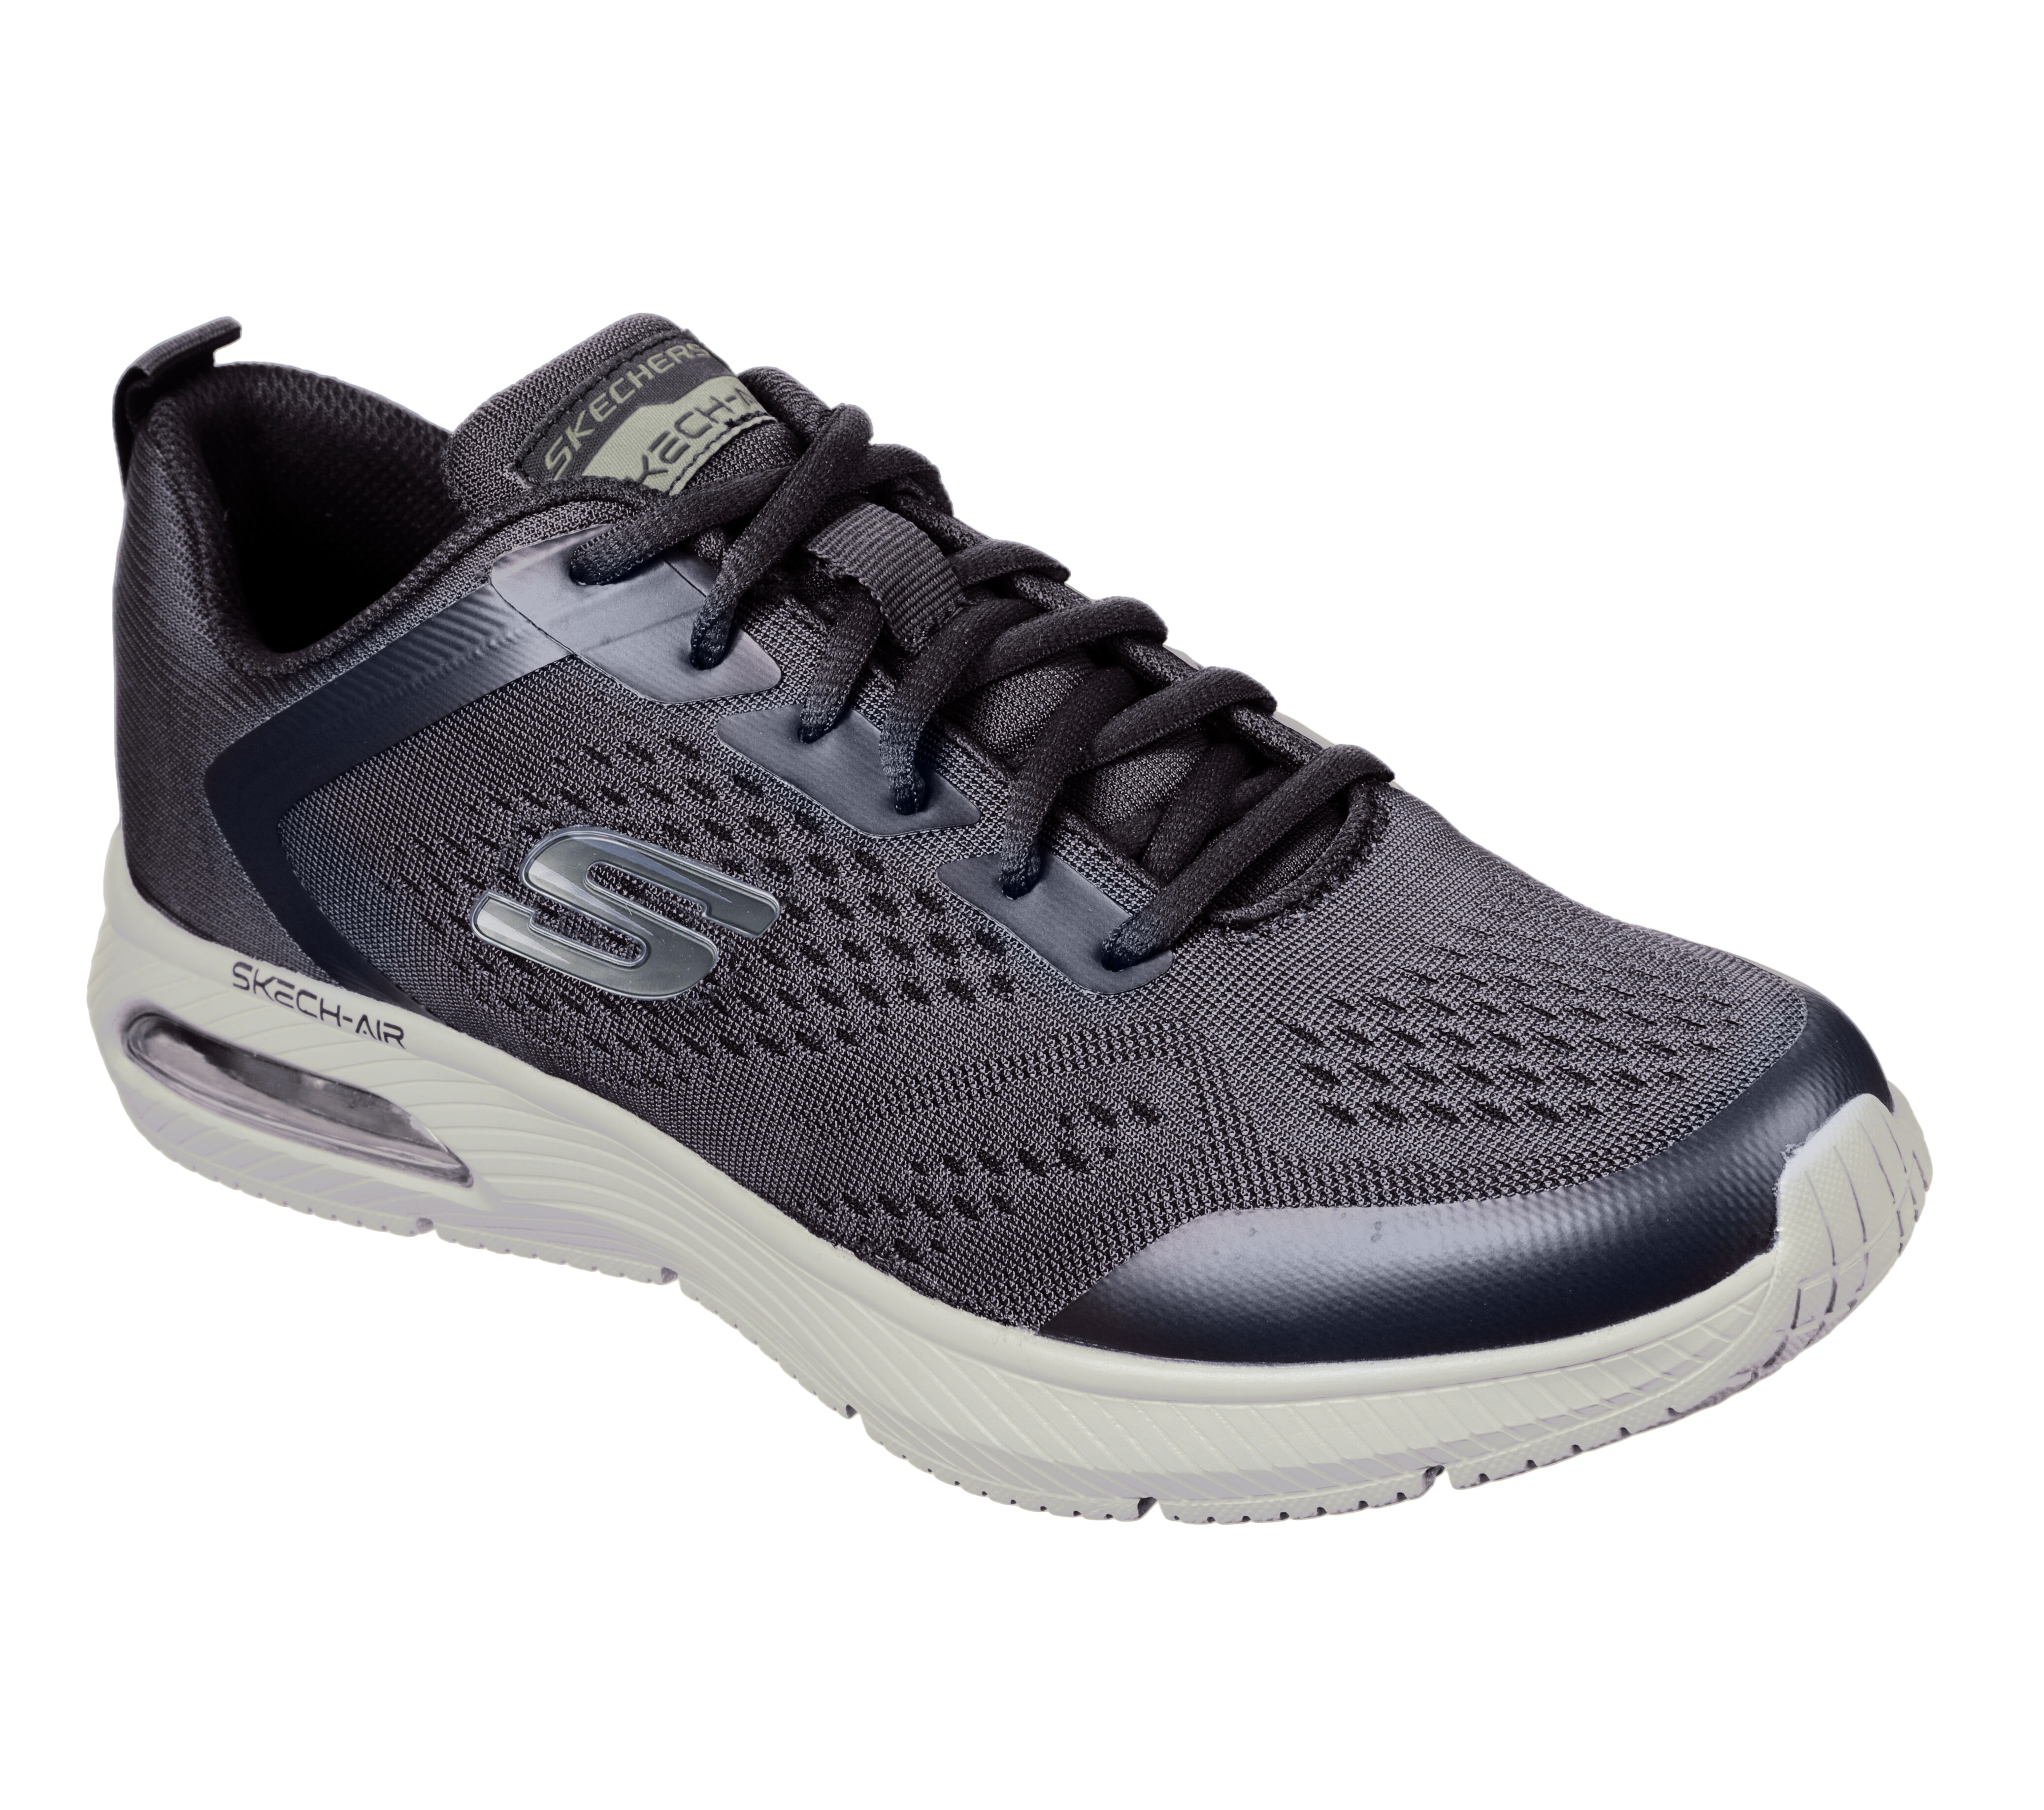 skechers dyna air running shoes